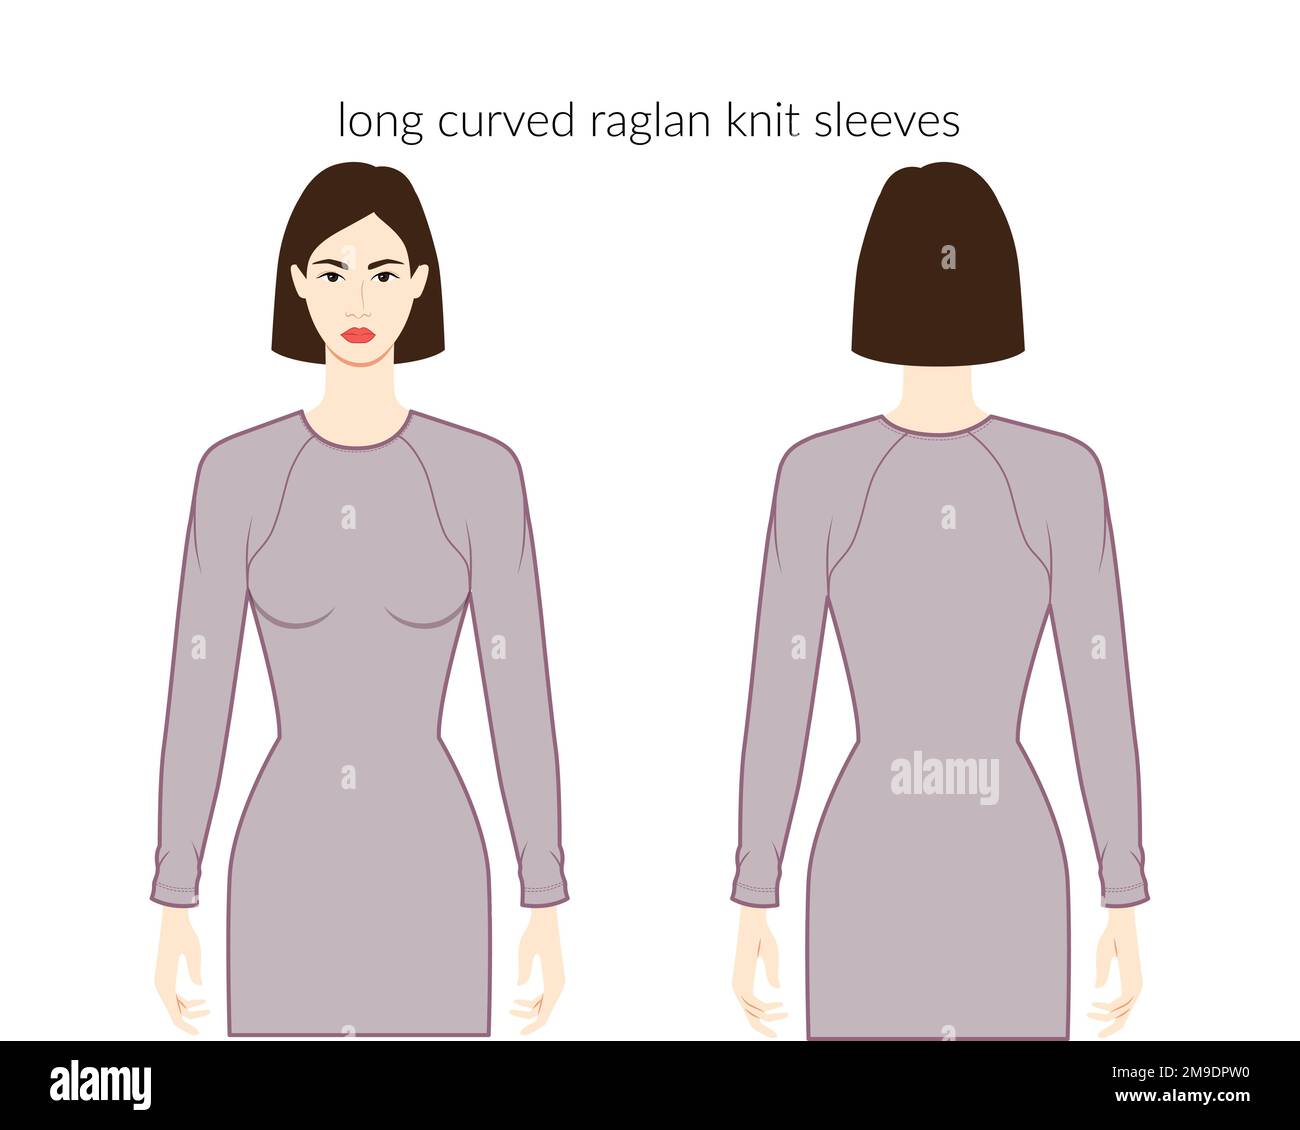 Curved raglan knit sleeves long length clothes lady in dresses, tops, shirts technical fashion illustration with fitted body. Flat apparel template front, back sides. Women, men unisex CAD mockup Stock Vector